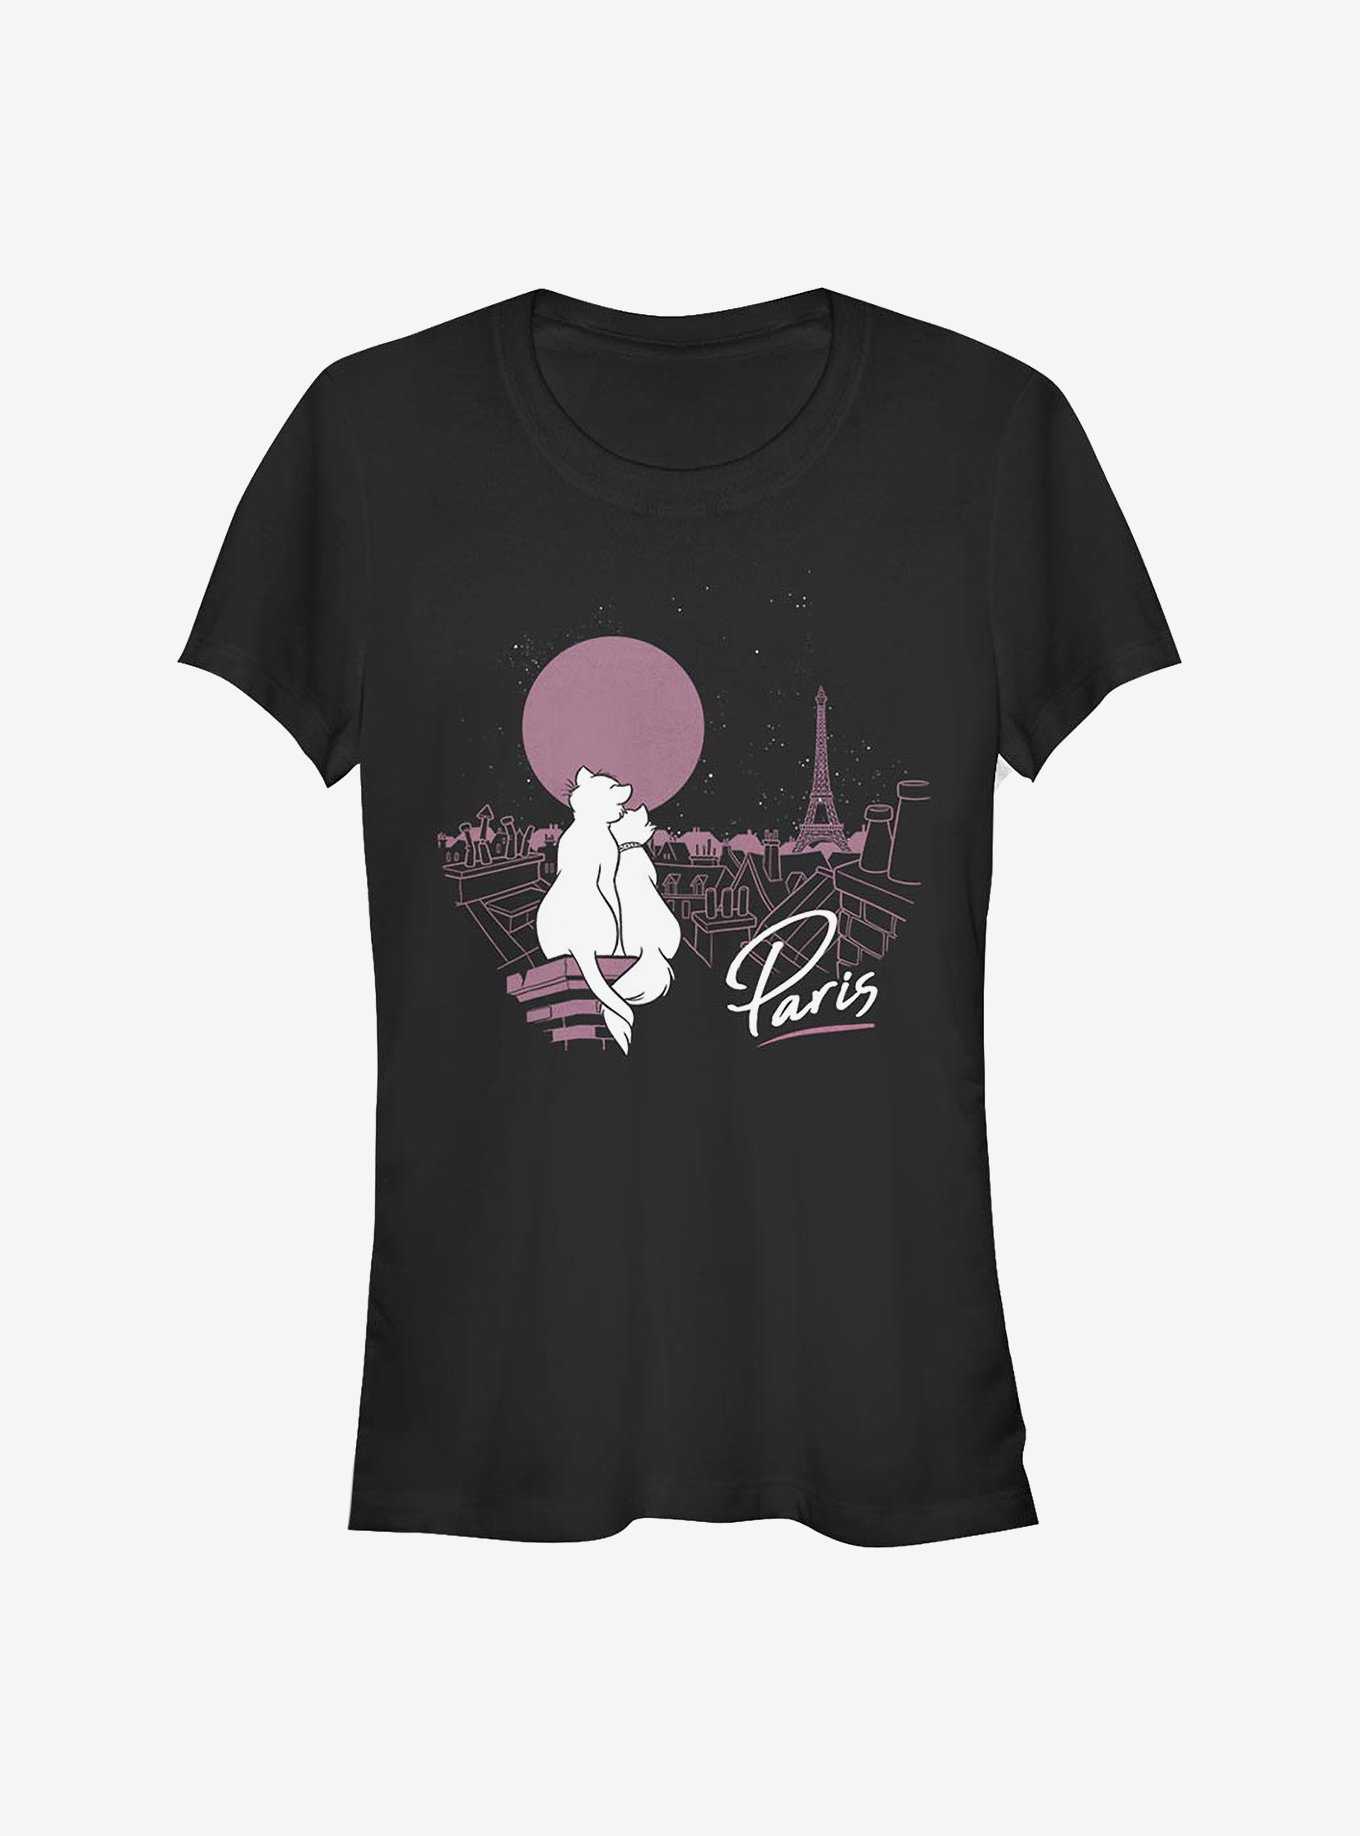 Plushies, | Merch & Aristocats Hot Shirts OFFICIAL Topic